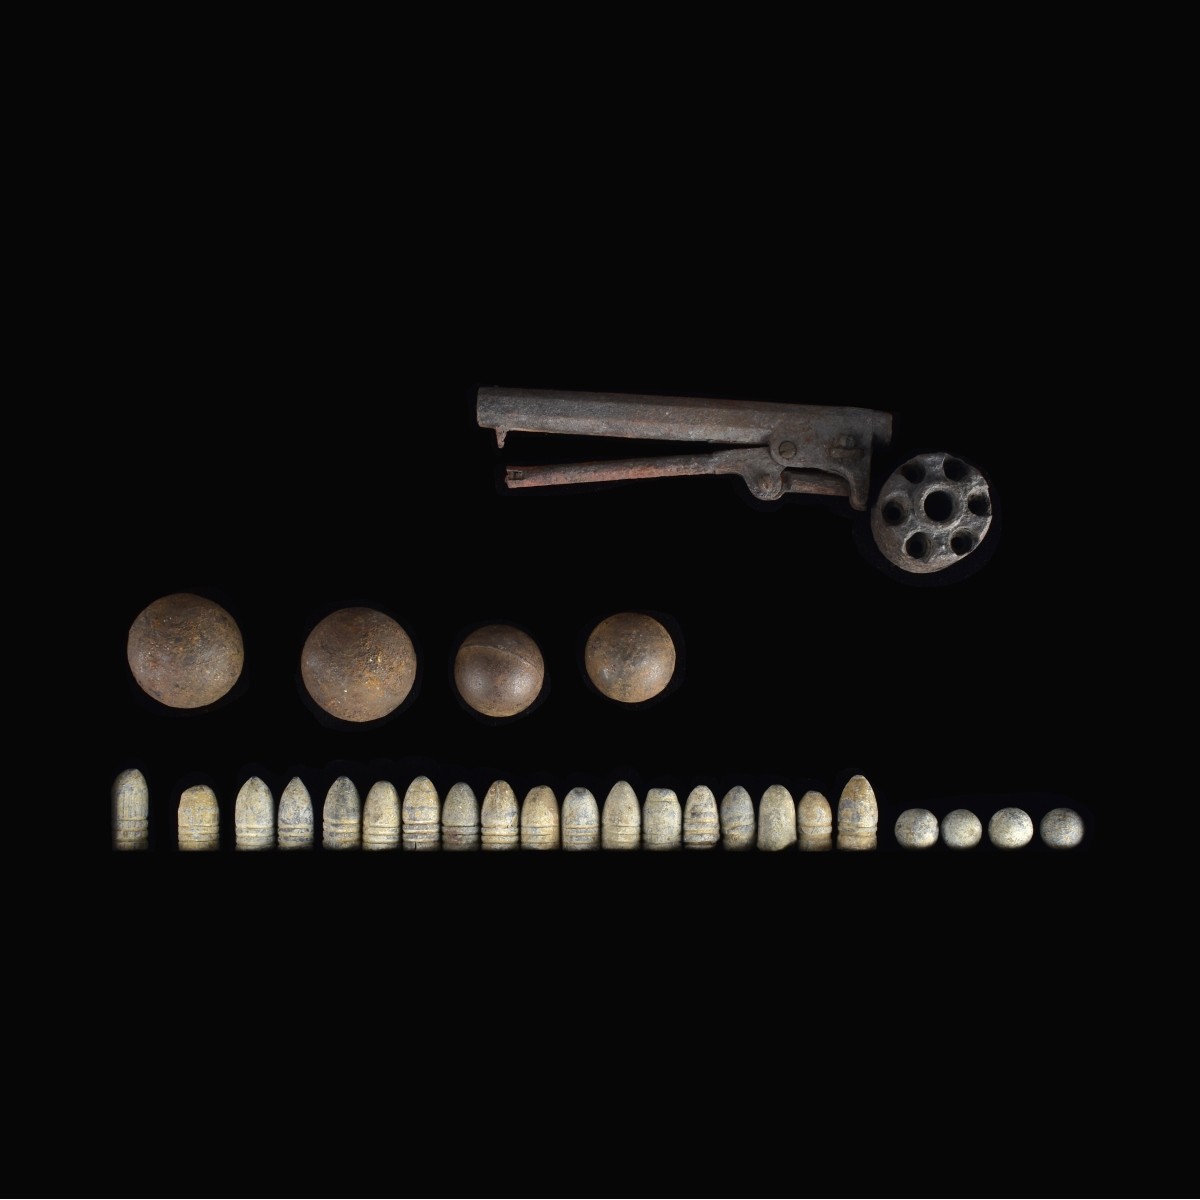 Antique Arms with Cannon Balls